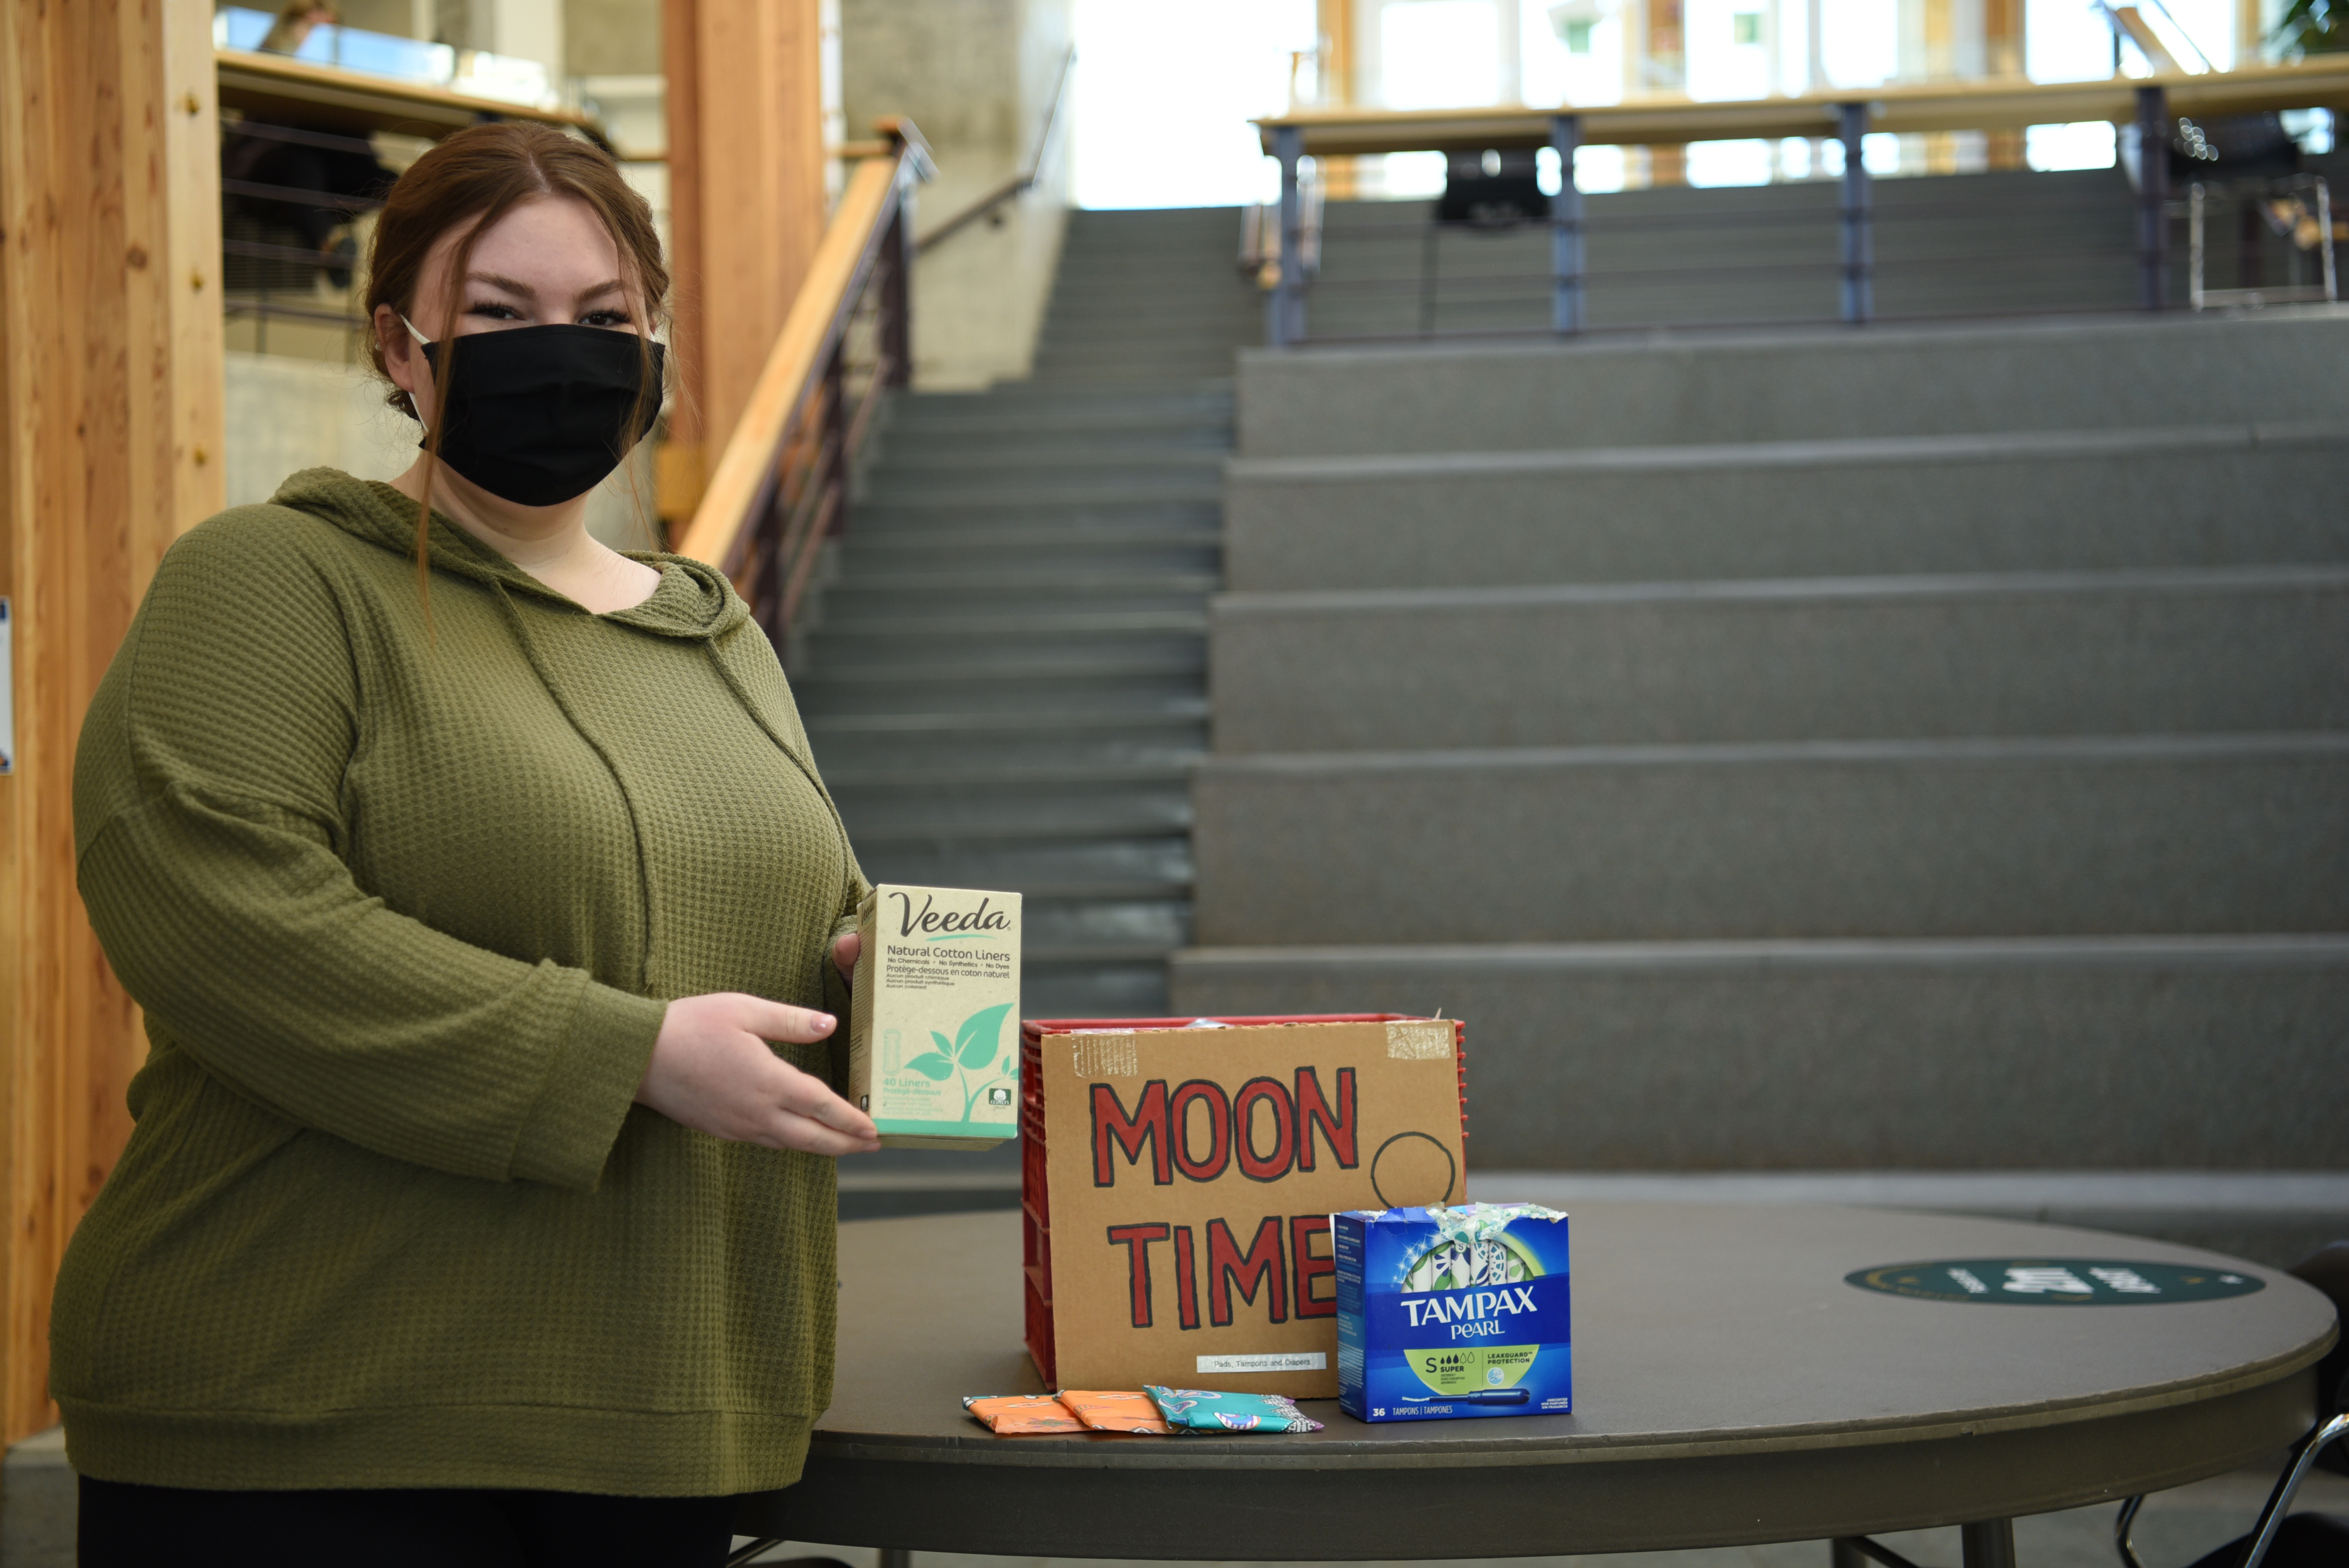 UNBC student Emily Erickson with menstrual products in the Canfor Winter Garden